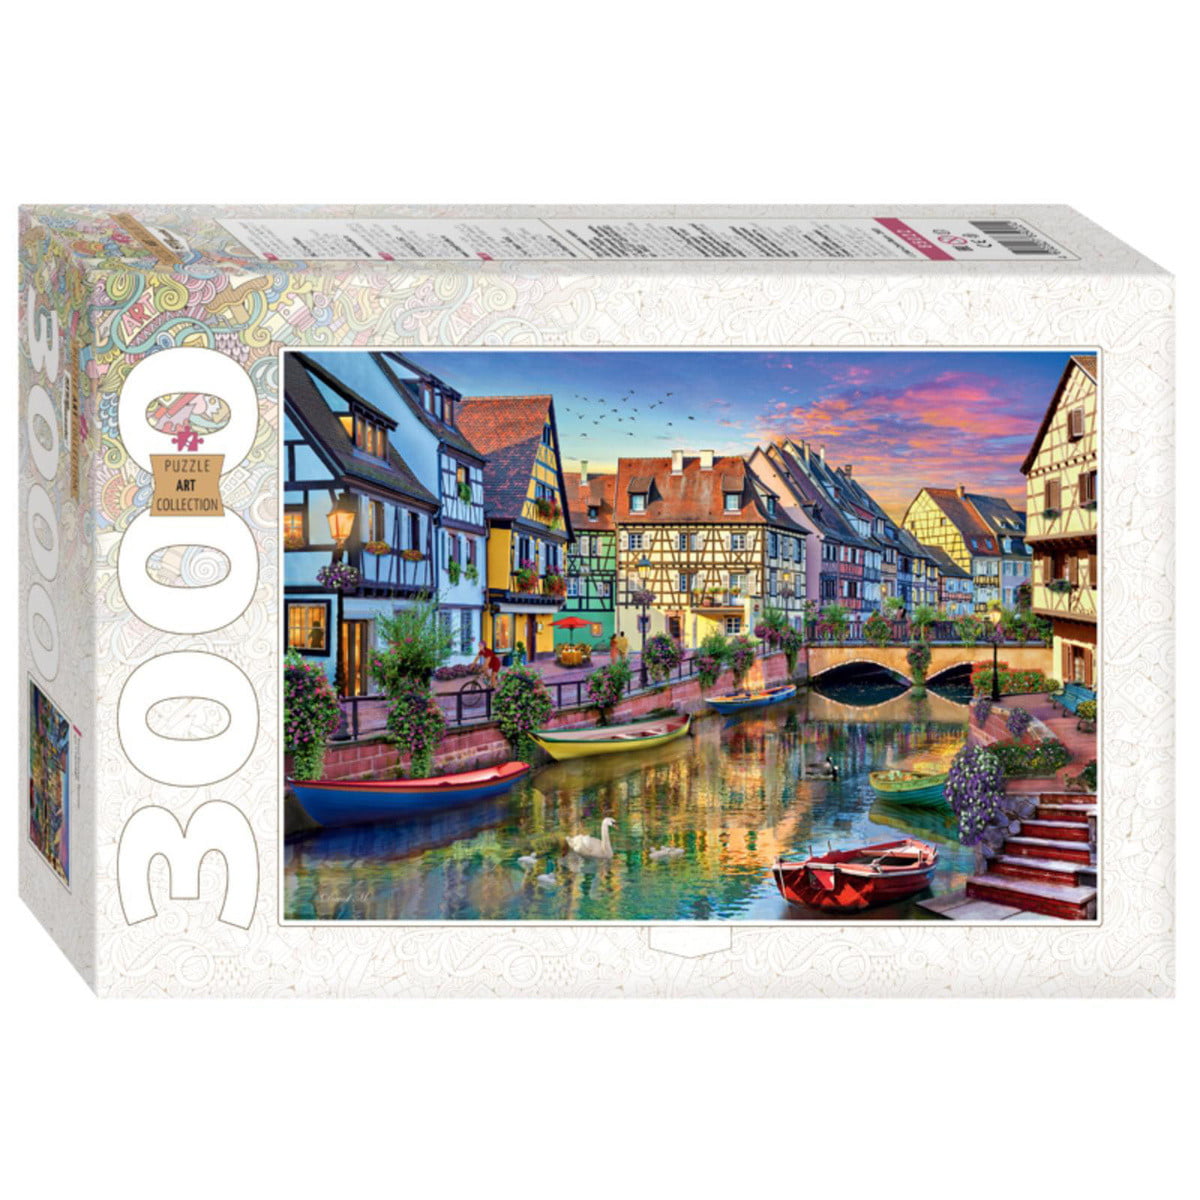 Adult 3000-piece Puzzle for Puzzle Jigsaw Puzzle Difficult and Challenge Seaside Wooden Boat